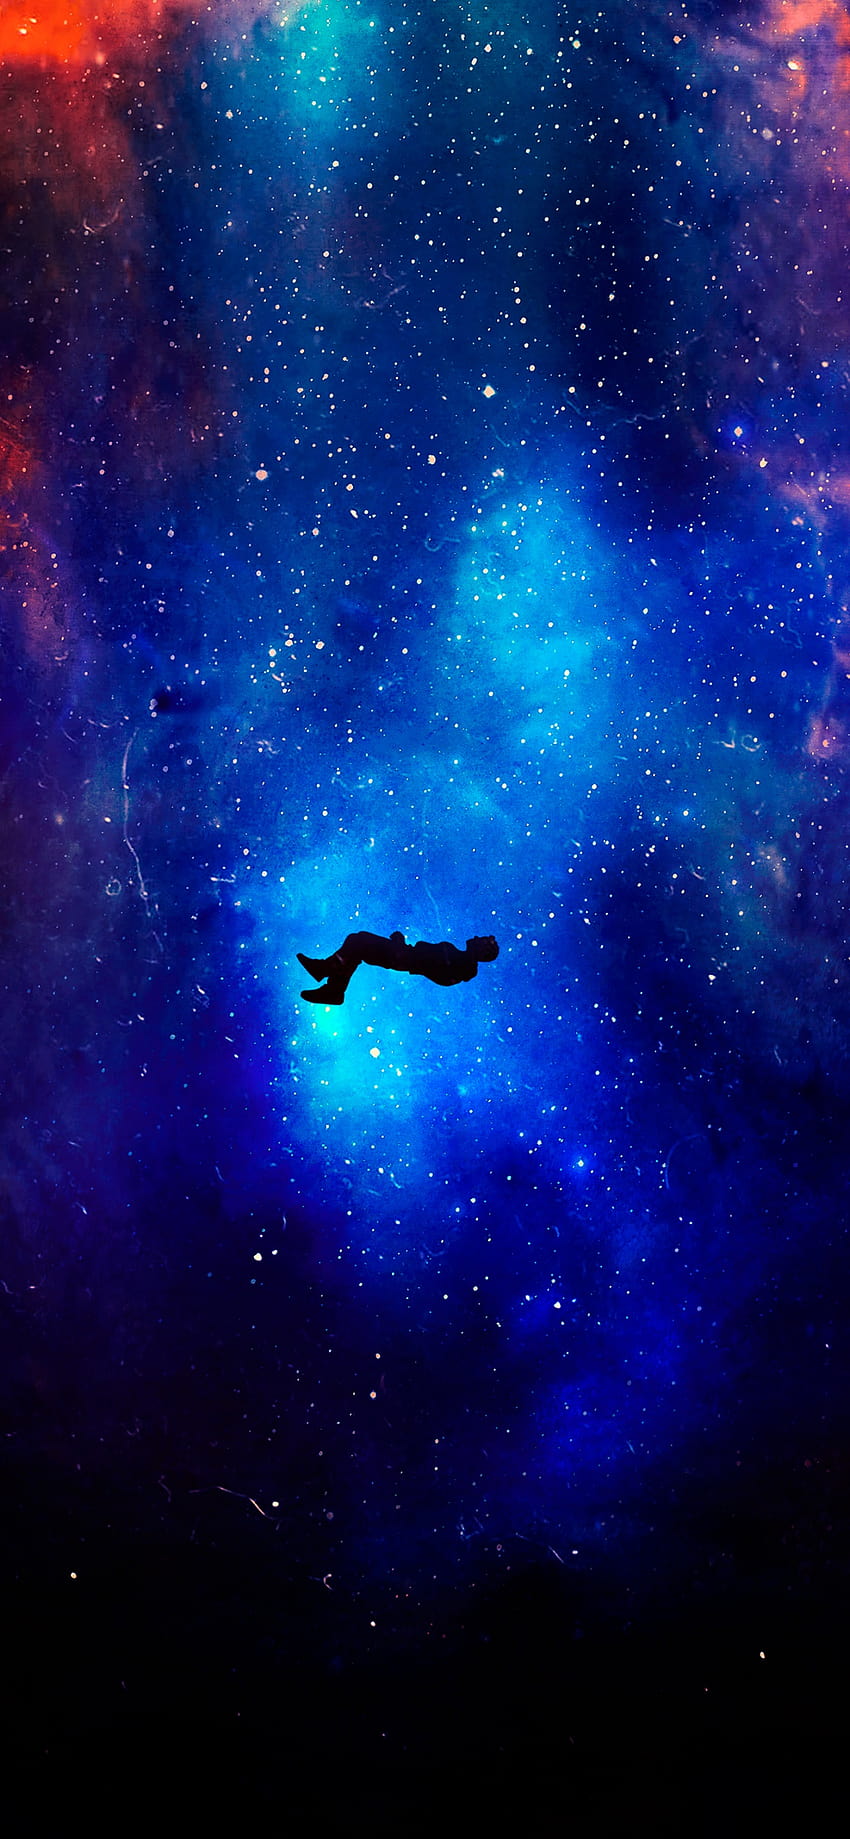 Lost in Space , Alone, Dream, Deep space, Nebula, Fantasy, space woman iphone HD phone wallpaper